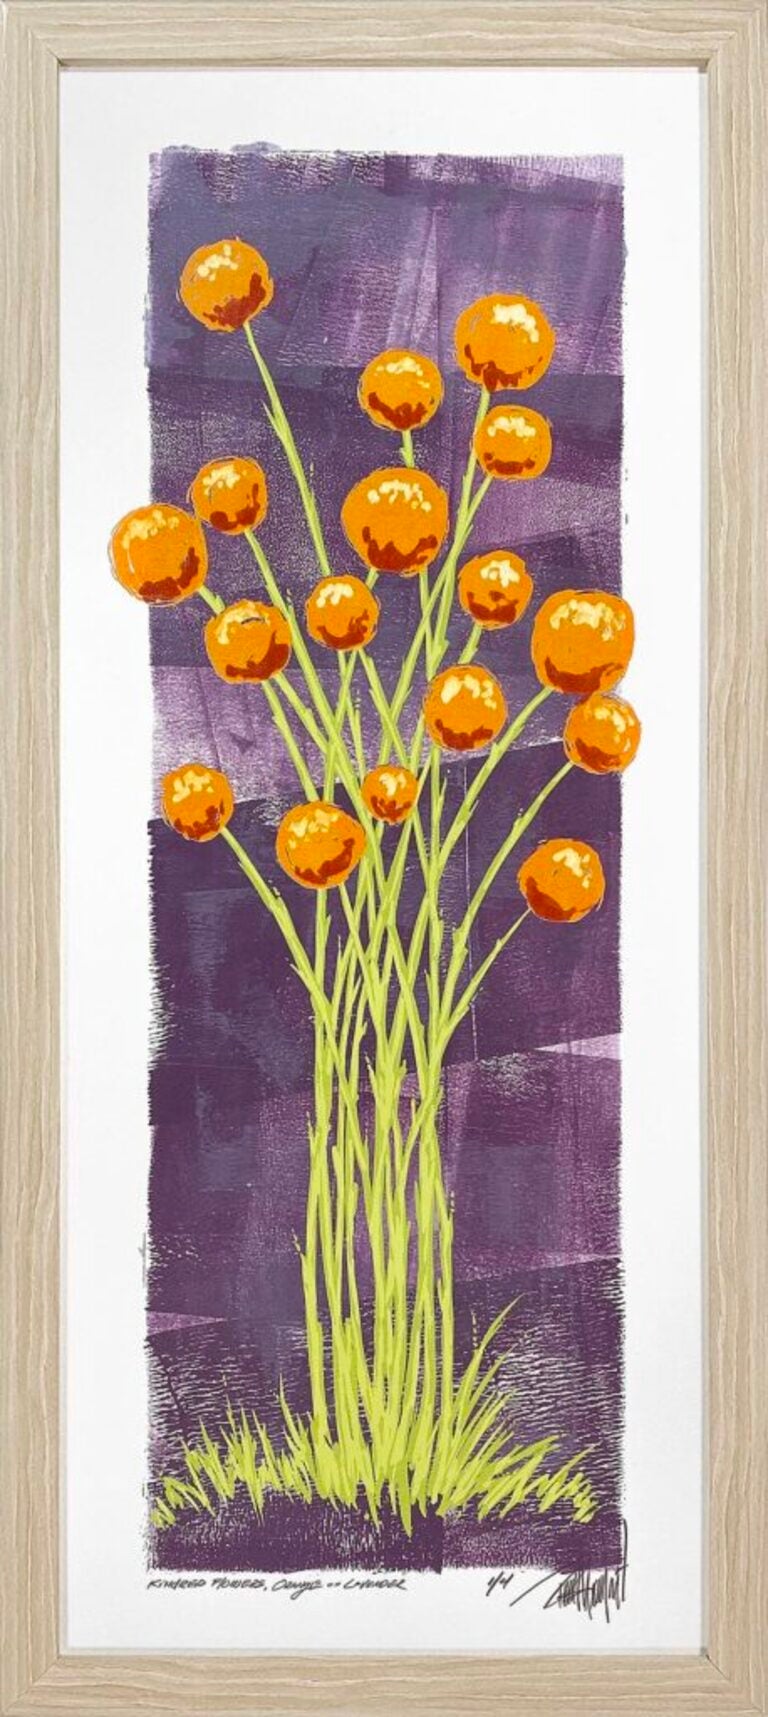 Kindred Flowers, Orange on Lavender (1/4) - Print by Terrell Thornhill 